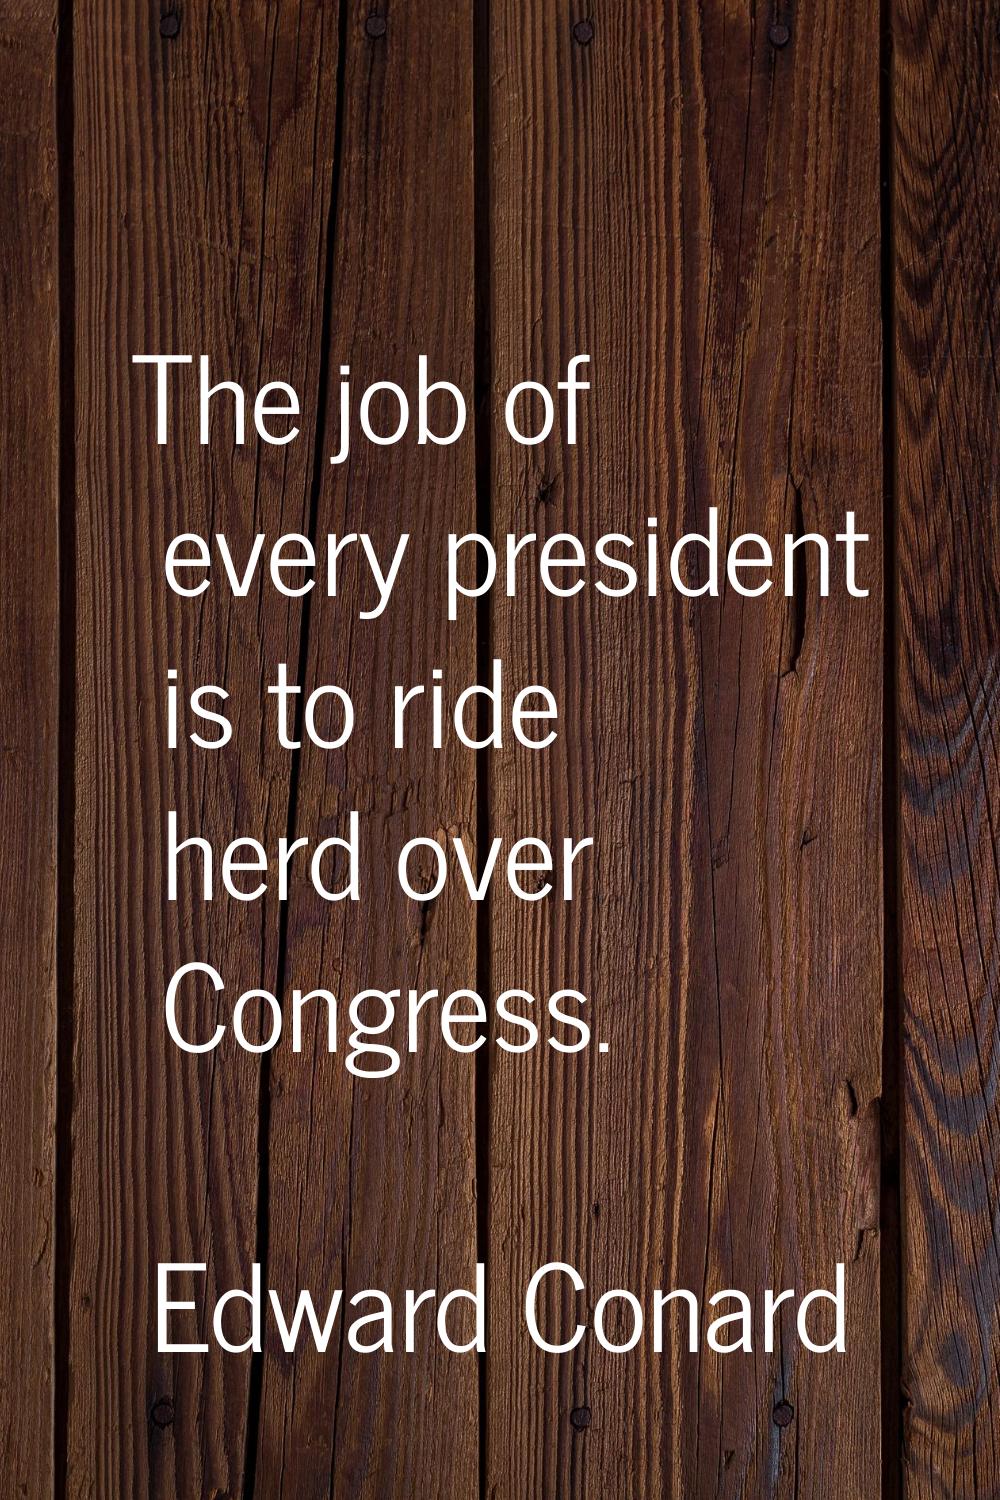 The job of every president is to ride herd over Congress.